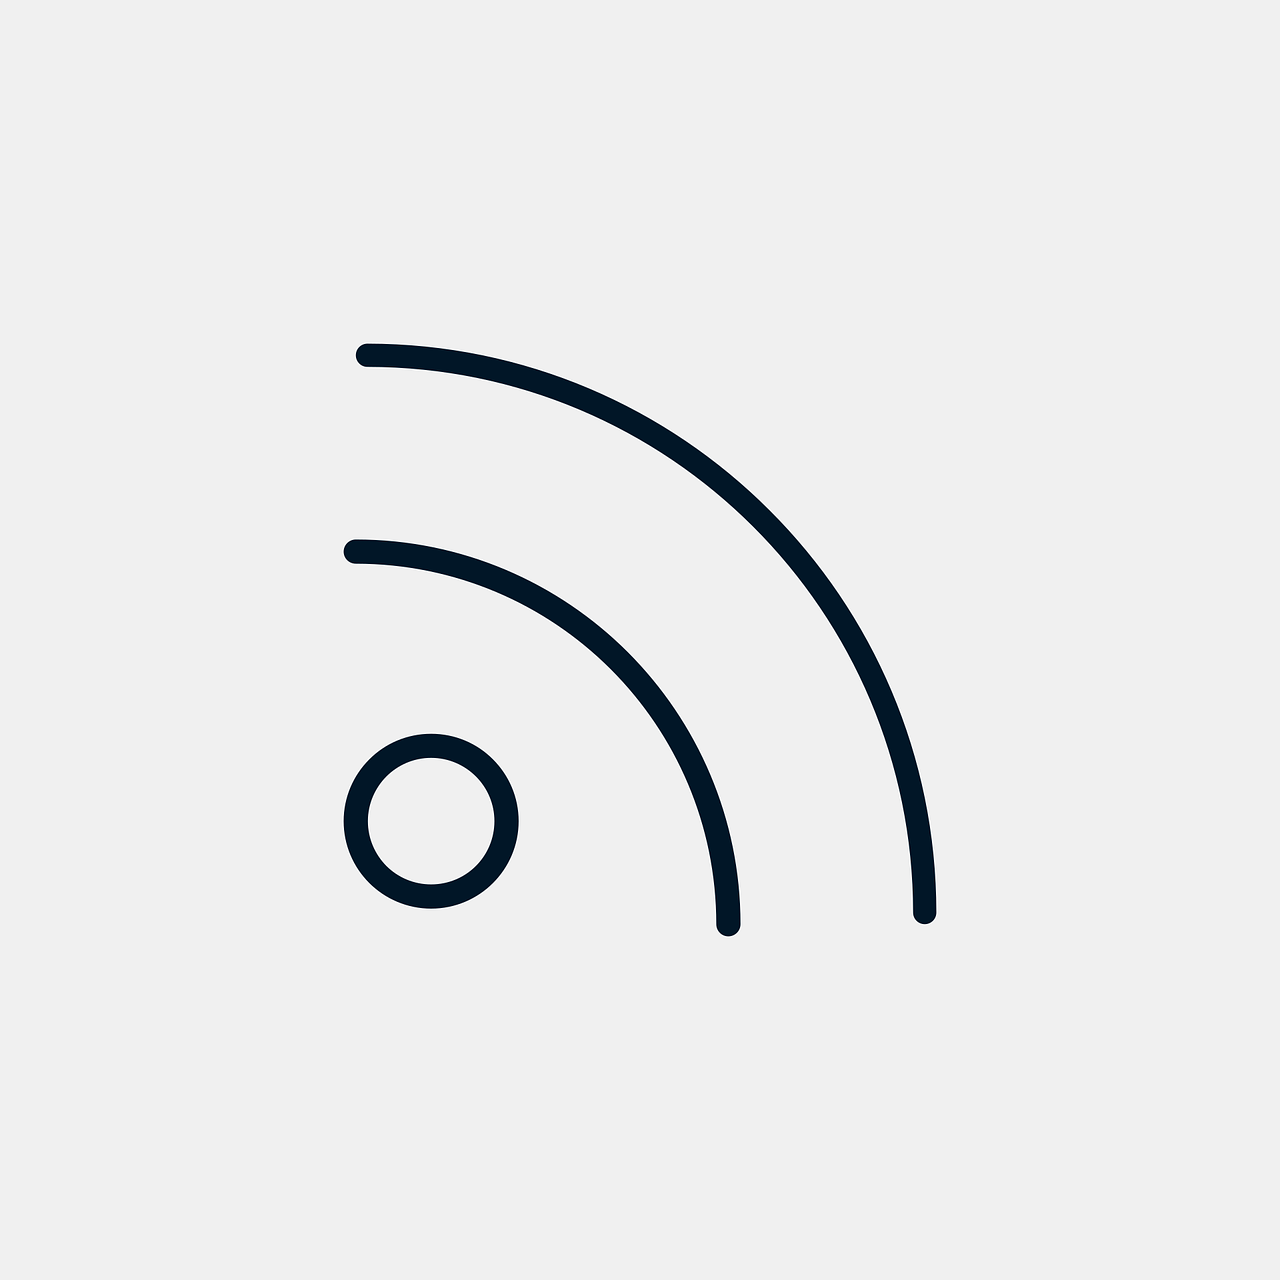 a black and white photo of a wifi symbol, an illustration of, minimalism, news feed, flat color and line, patreon, rounded corners